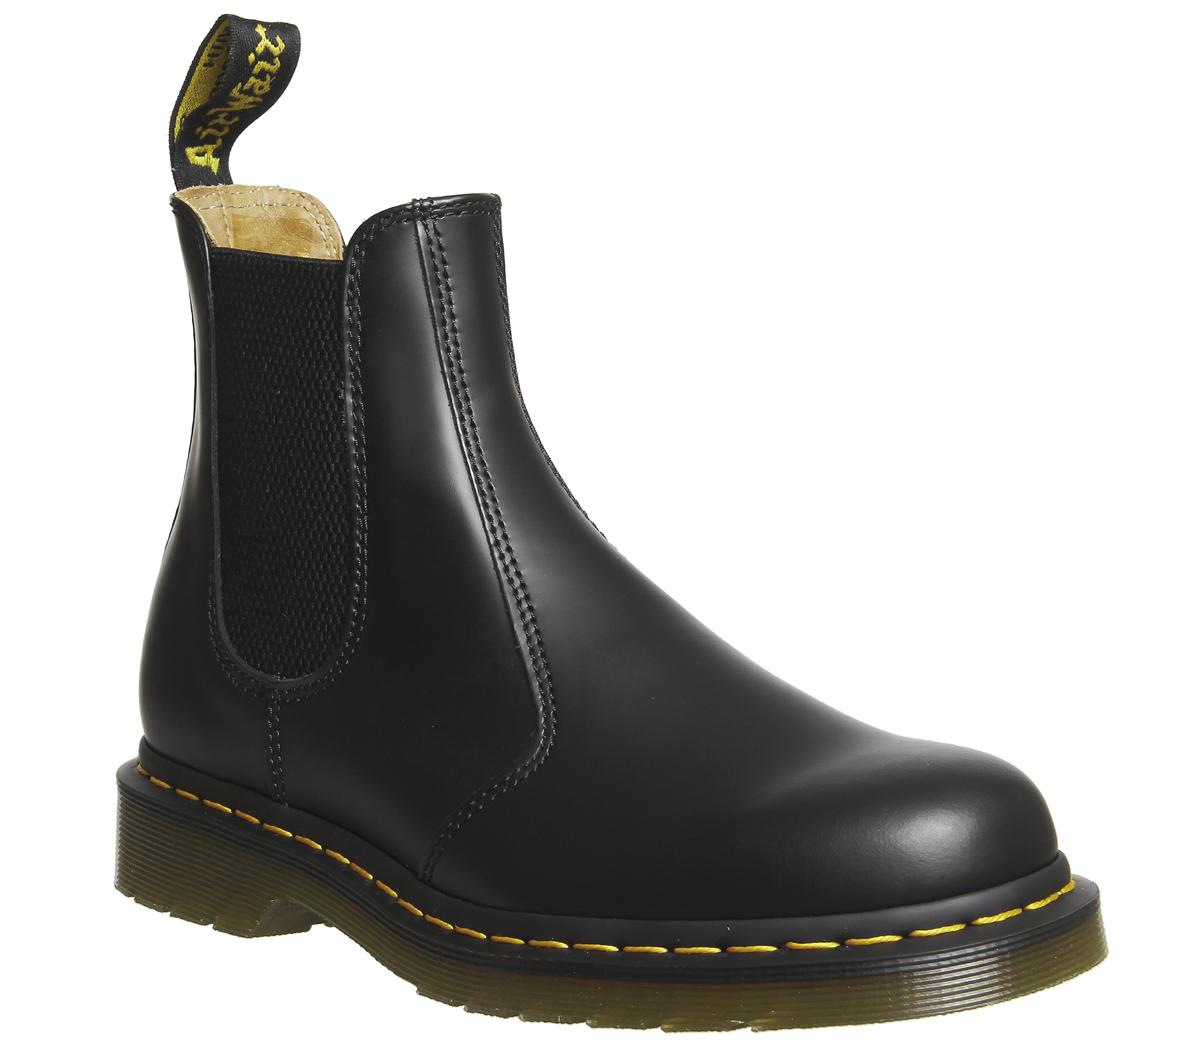 Lyst - Dr. Martens 2976 Chelsea Boots in Black